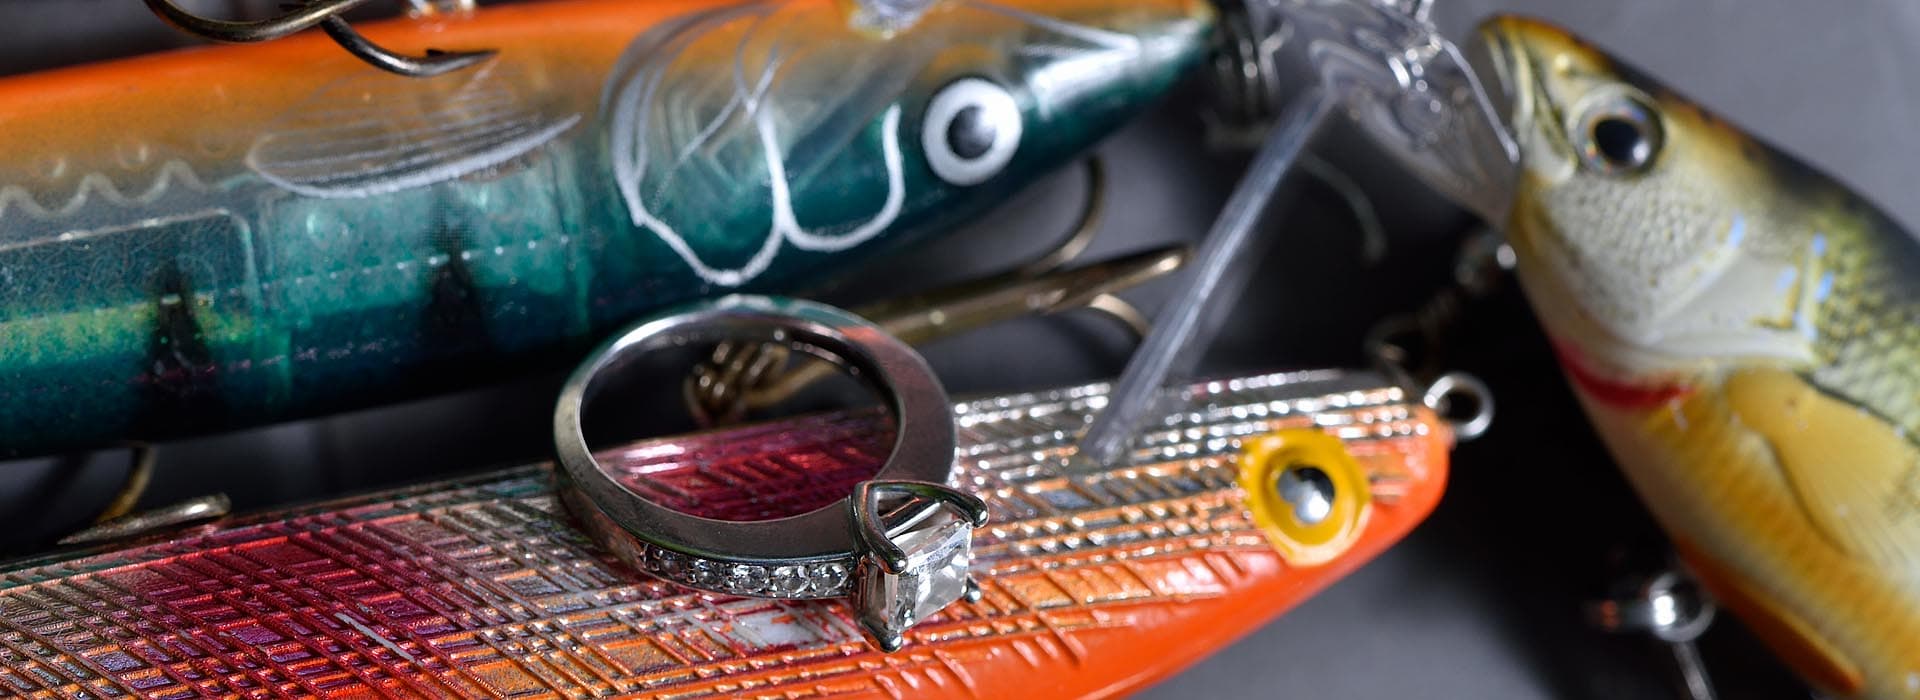 wedding rings with fishing lures barrie photographer tiny township photography